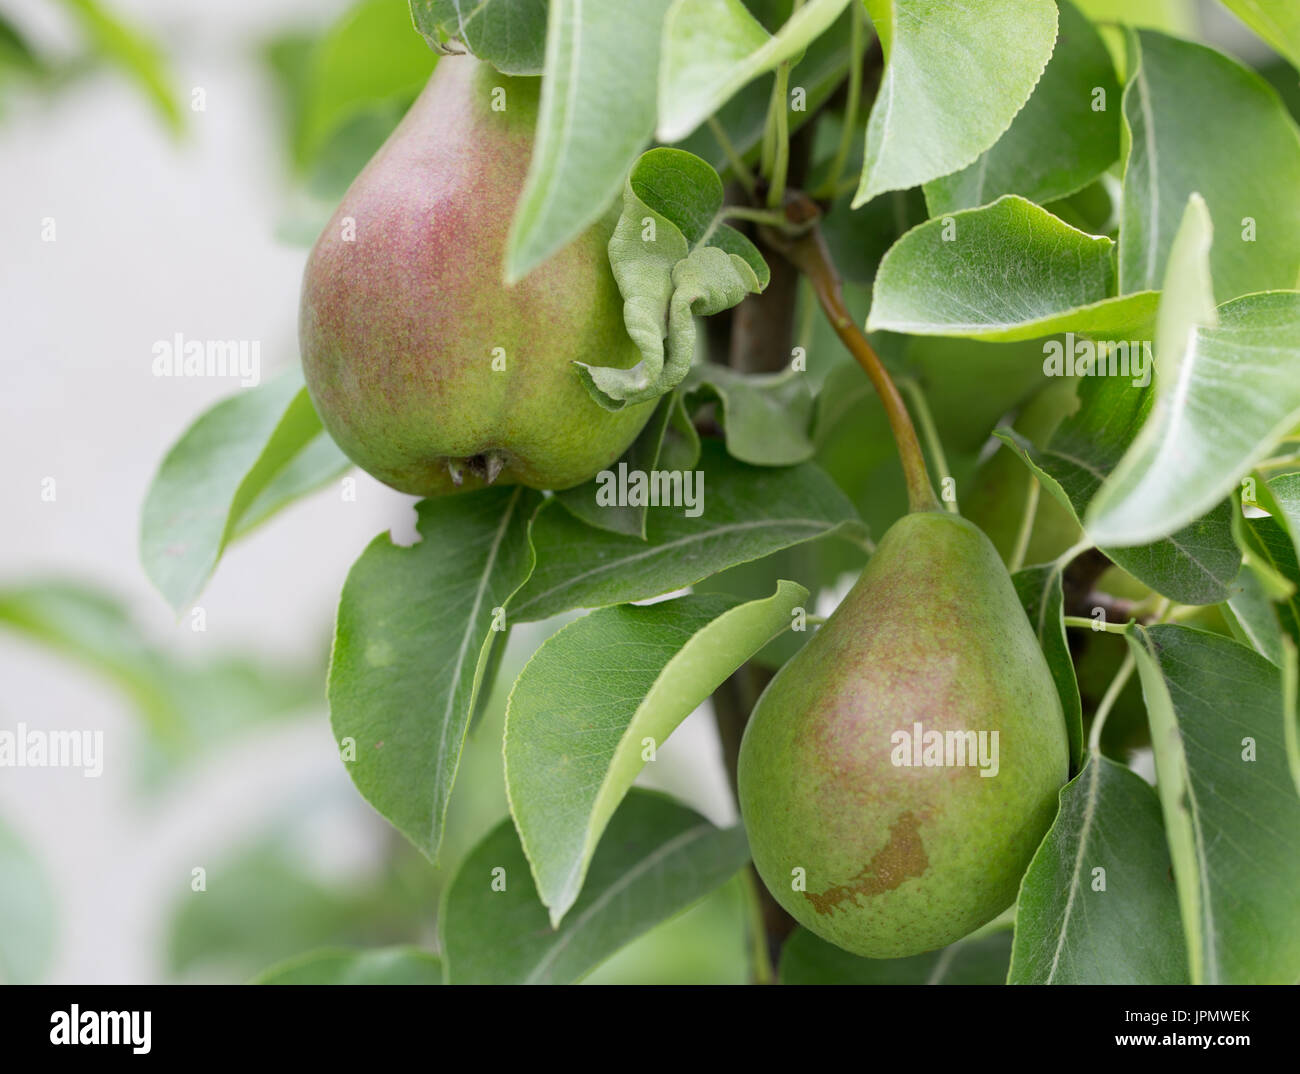 close up of green pears on a tree. Stock Photo